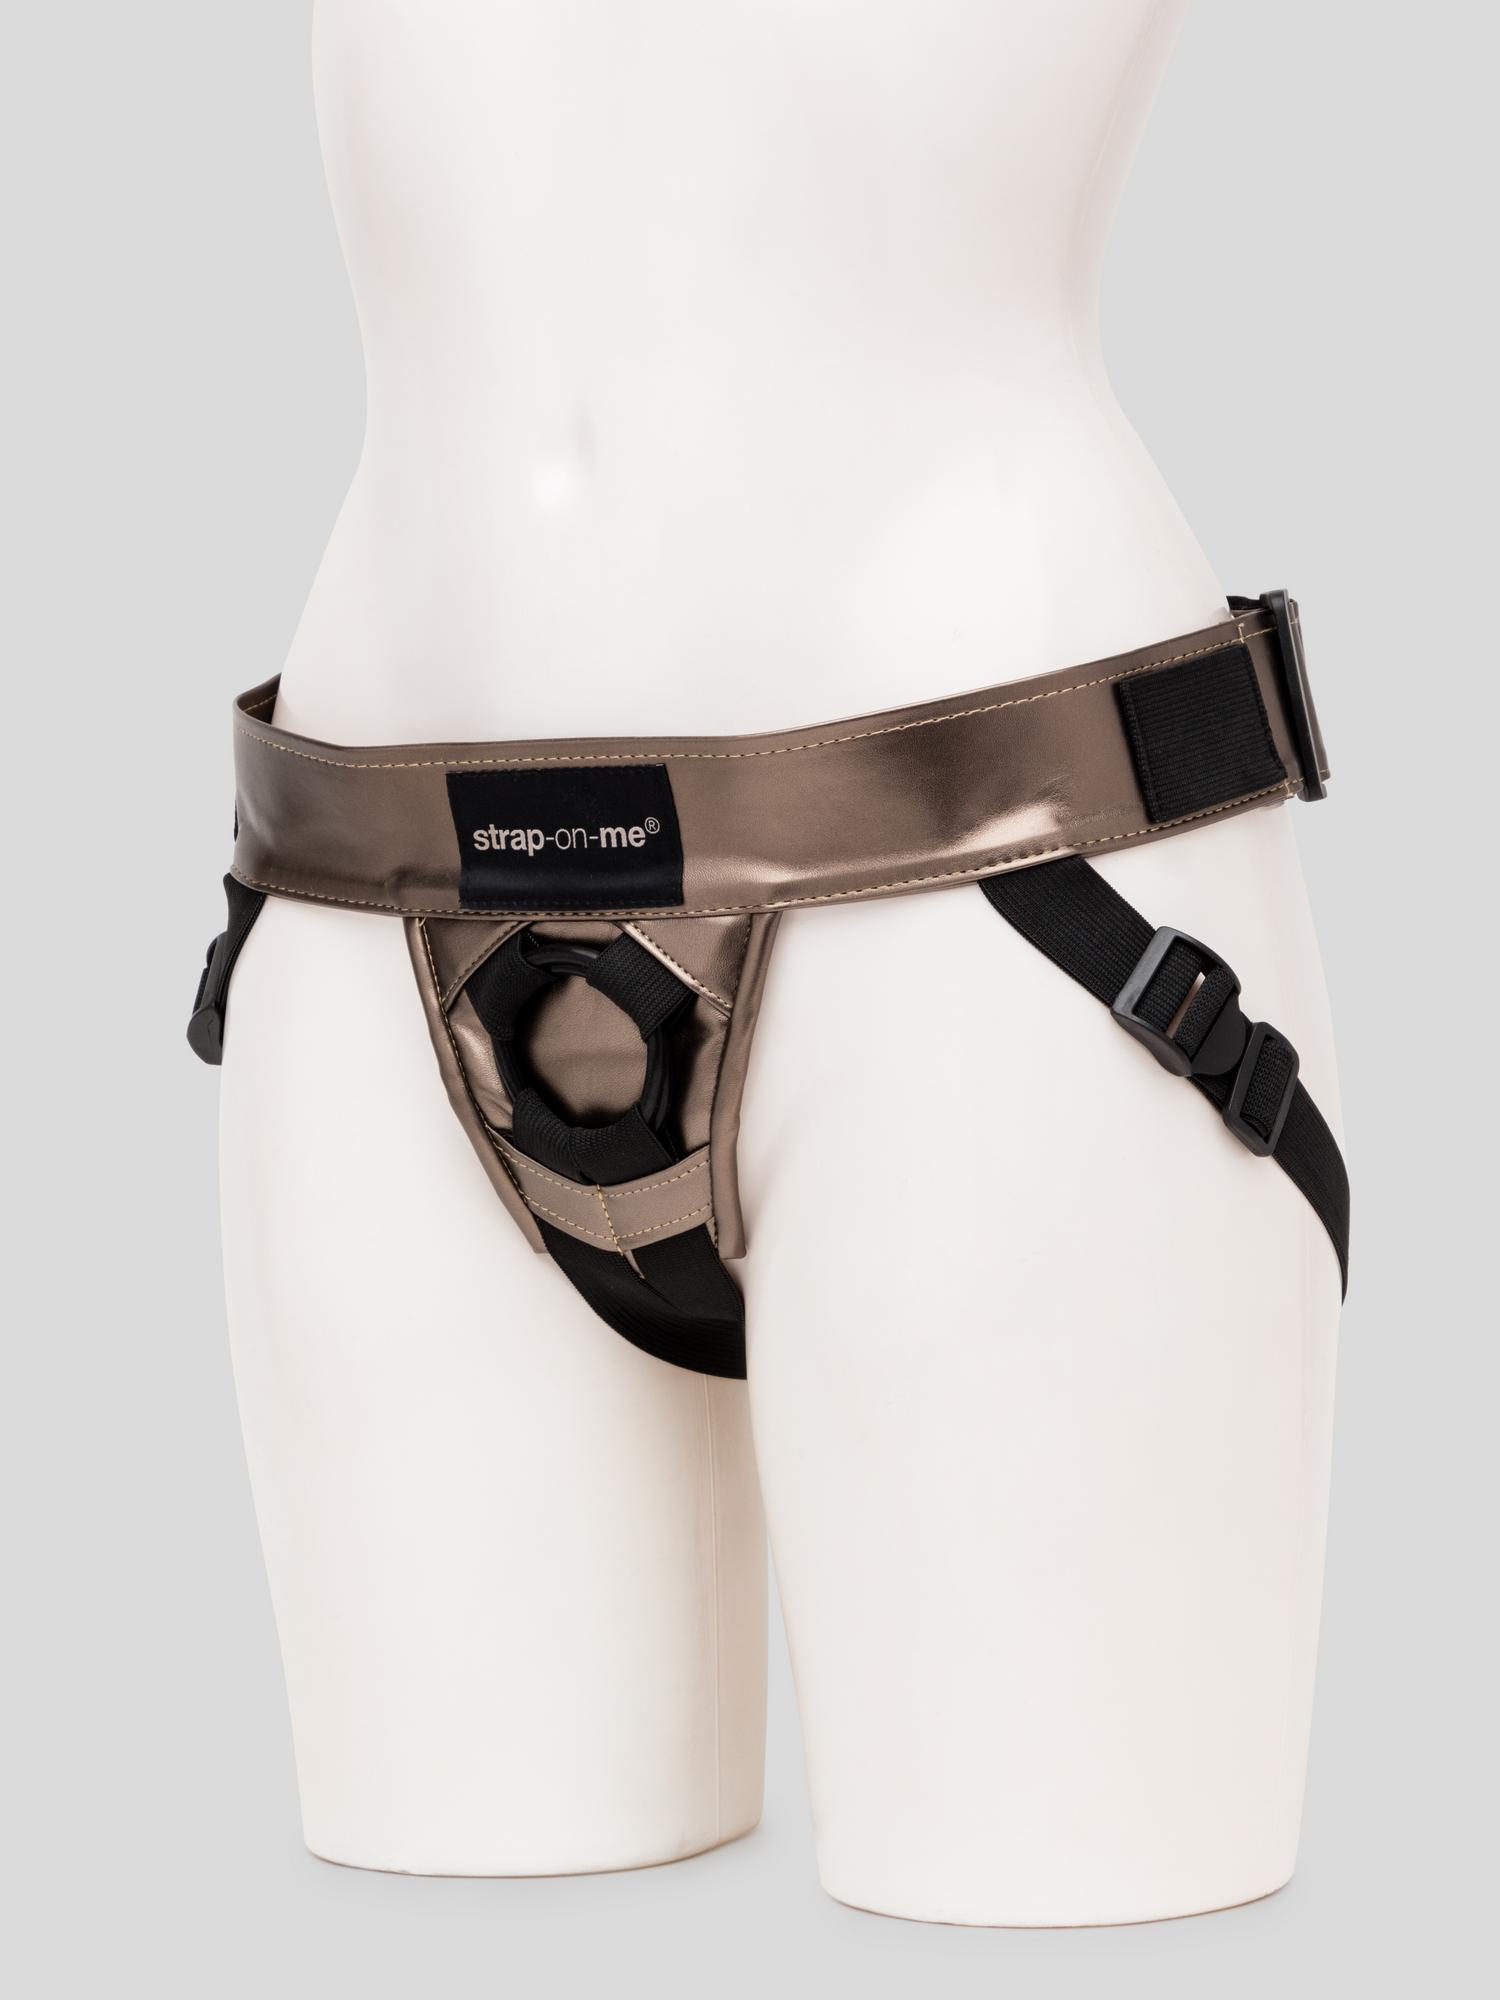 Strap-On-Me Vegan Leather Harness Curious. Slide 3